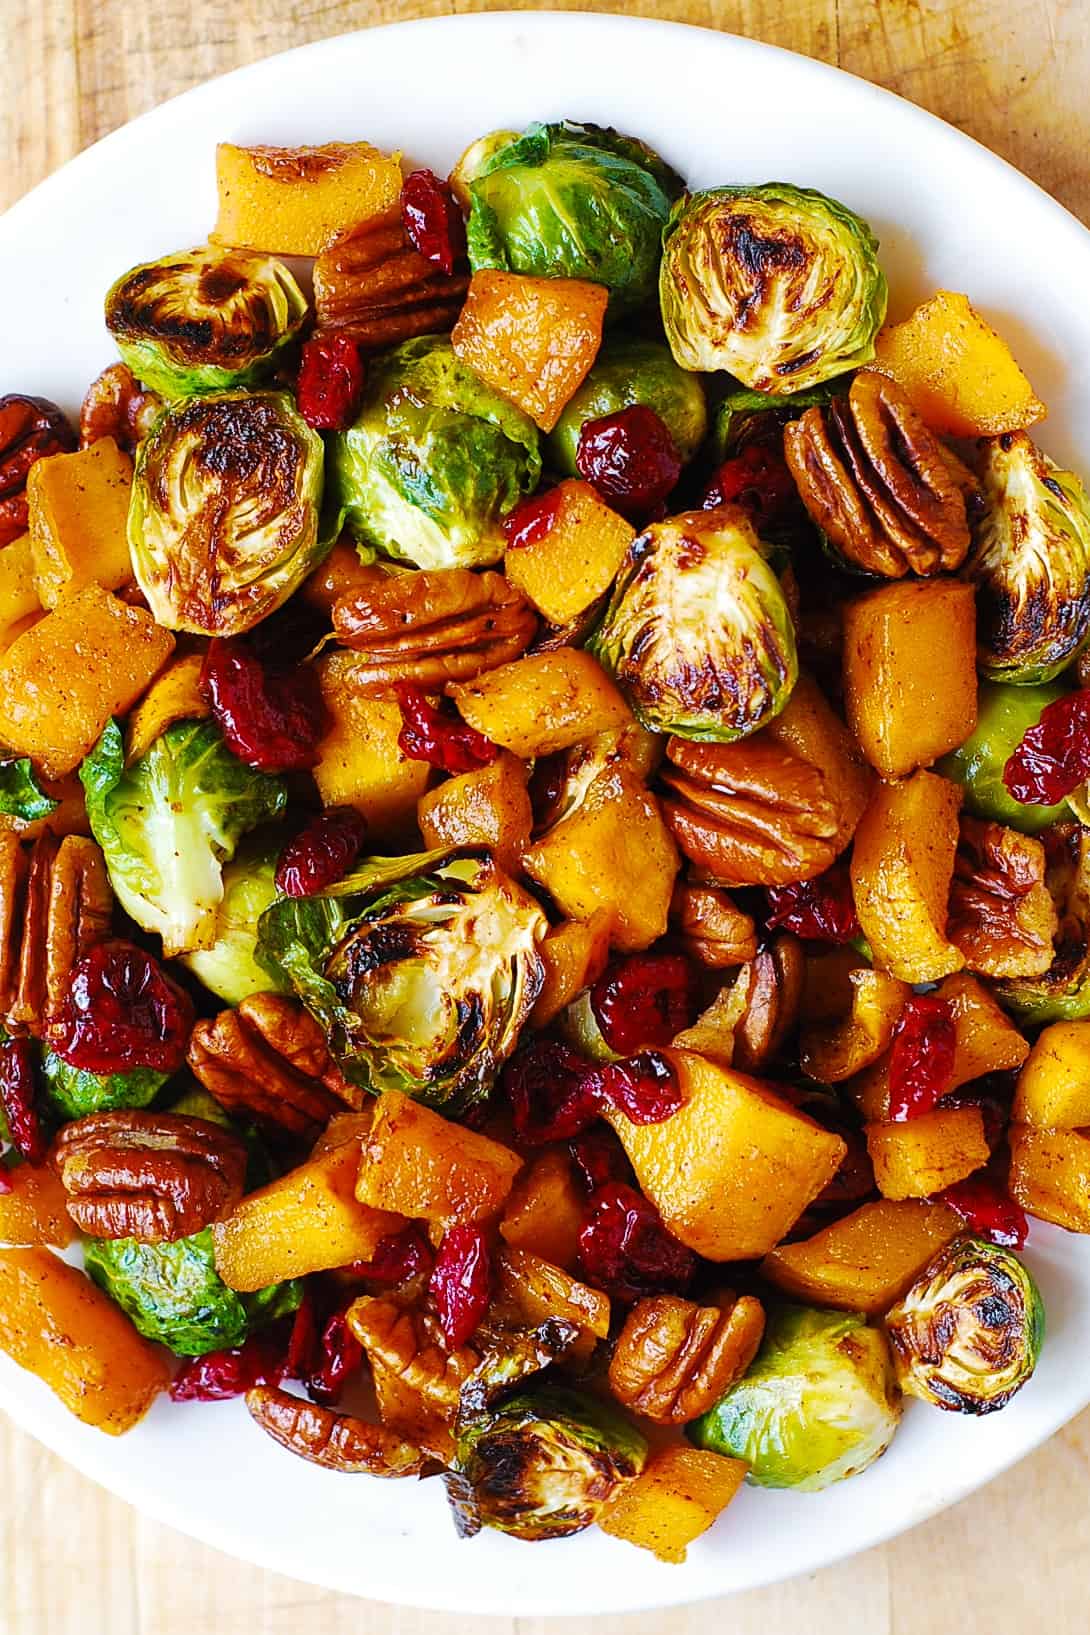 Roasted Brussels sprouts and Cinnamon Butternut Squash with Pecans and Dried Cranberries - on a white plate.